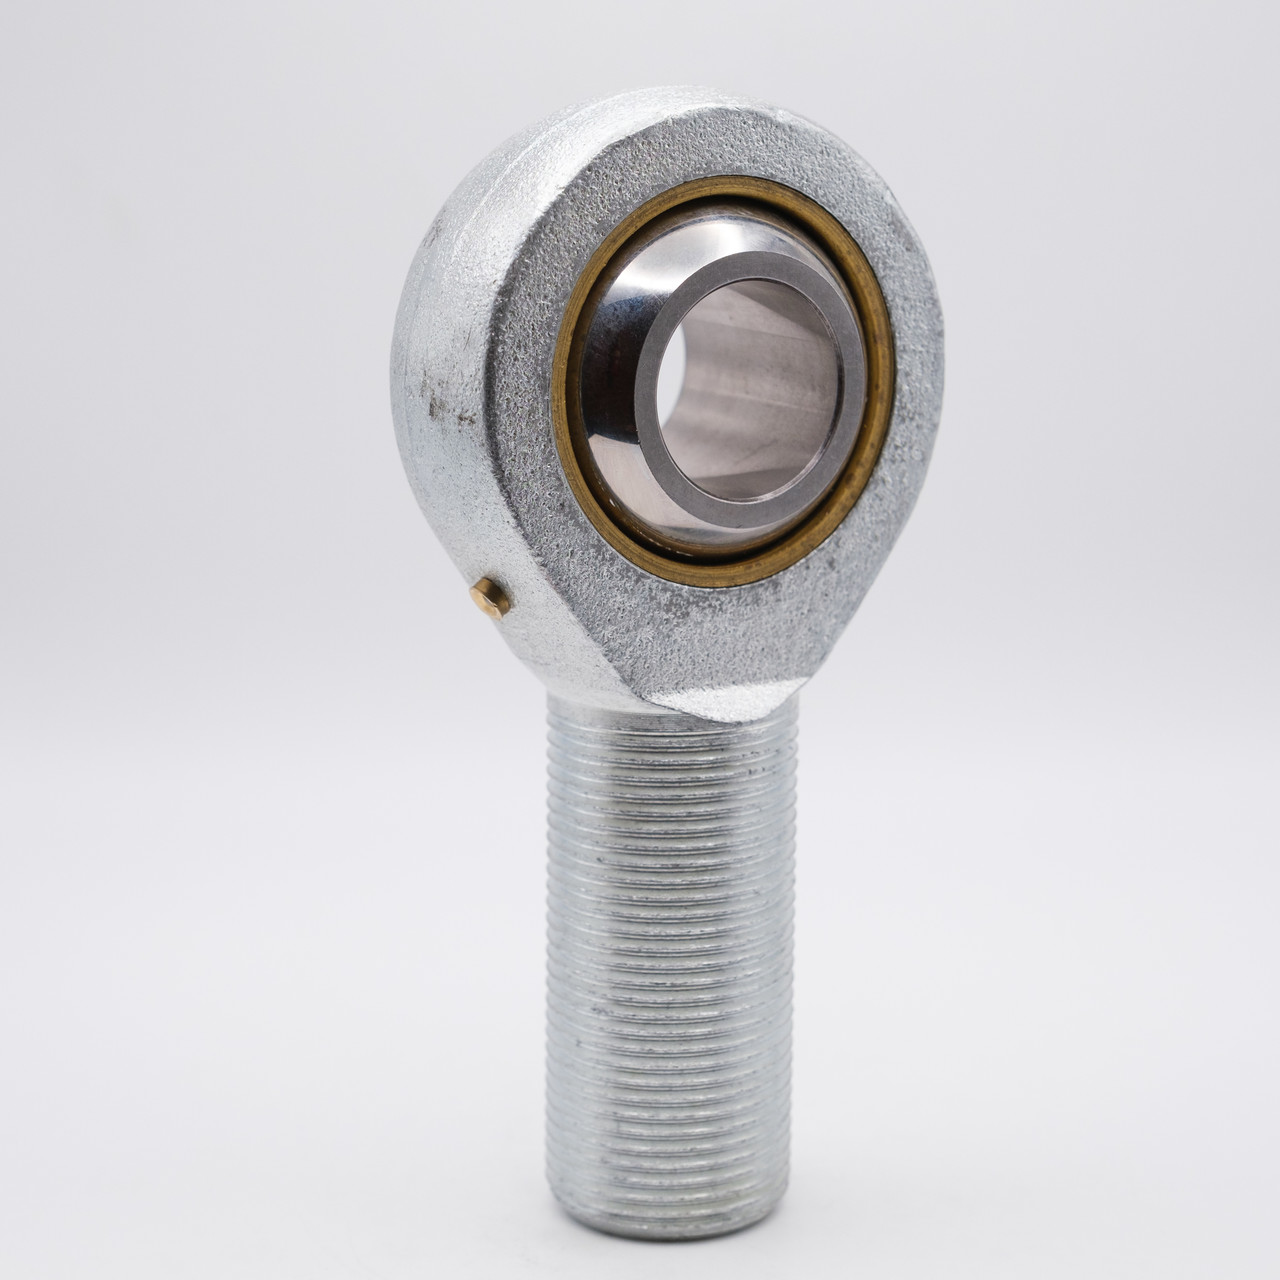 6mm POS6 Rod-End Bearing Right Hand Side View